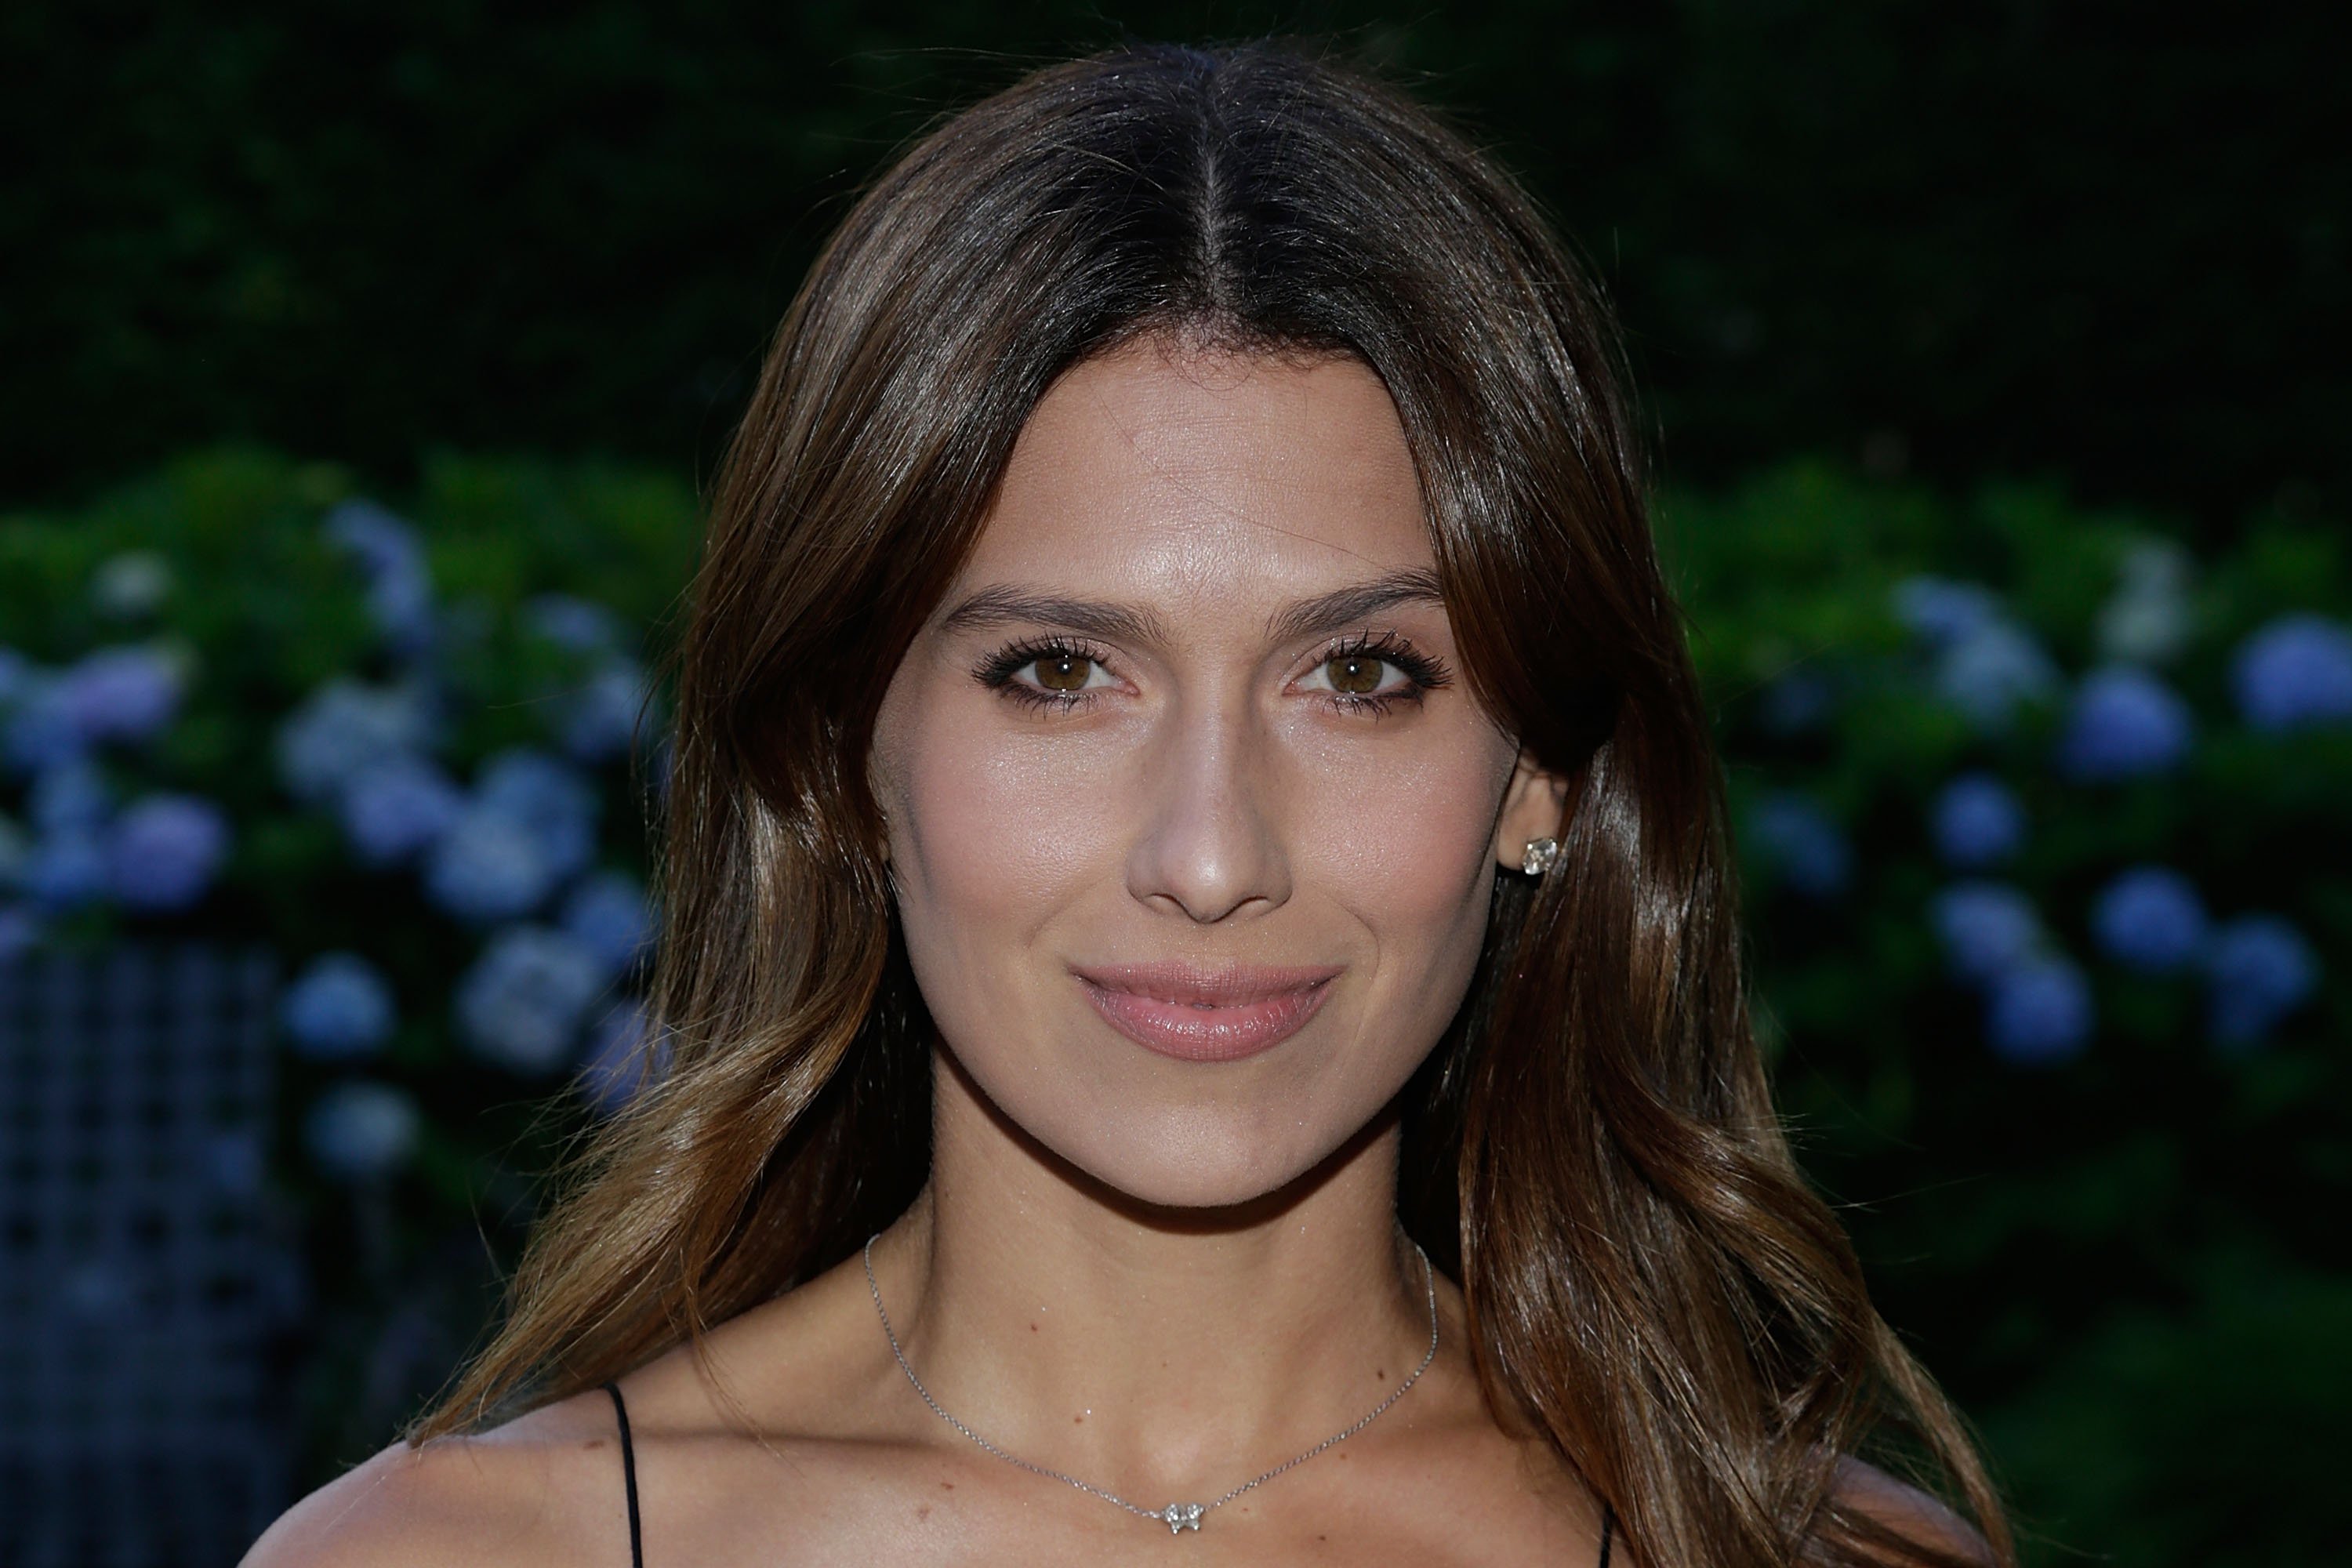 Hilaria Baldwin pictured at the Hamptons International Film Festival. | Photo: Getty Images